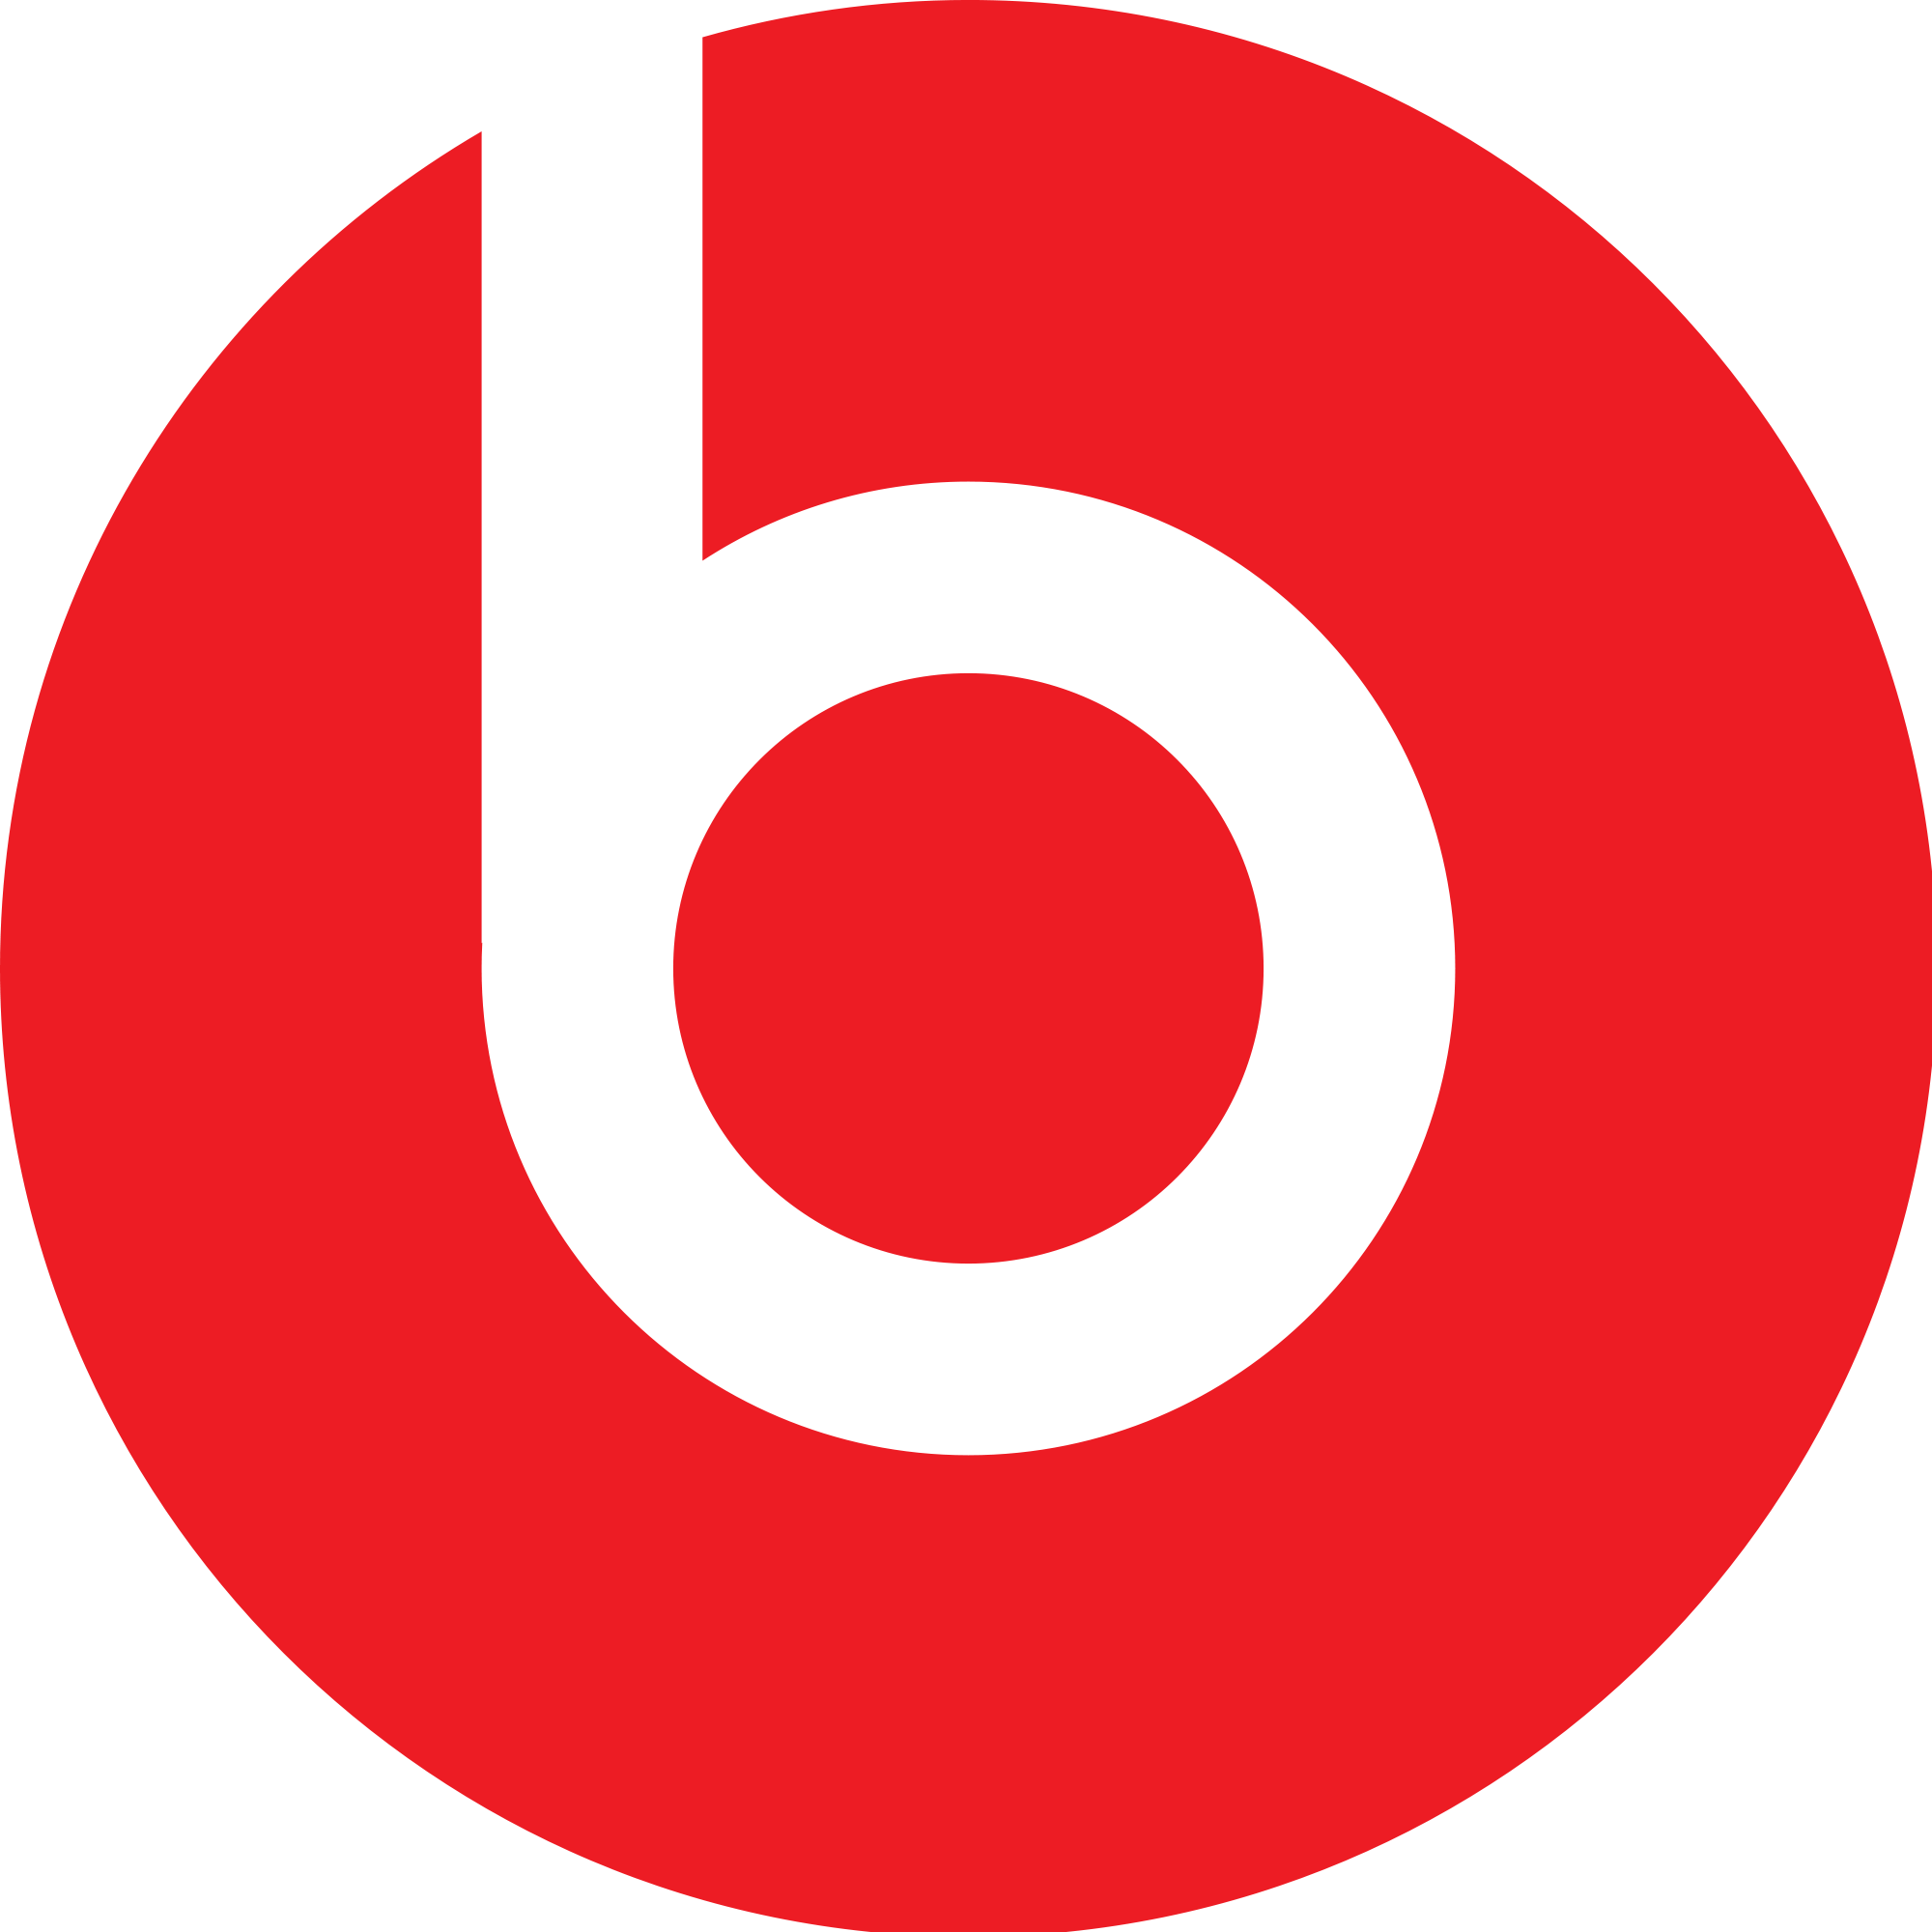 Red Beats Logo - Dr Dre Beats Logo) The positive space looks like a bullseye and